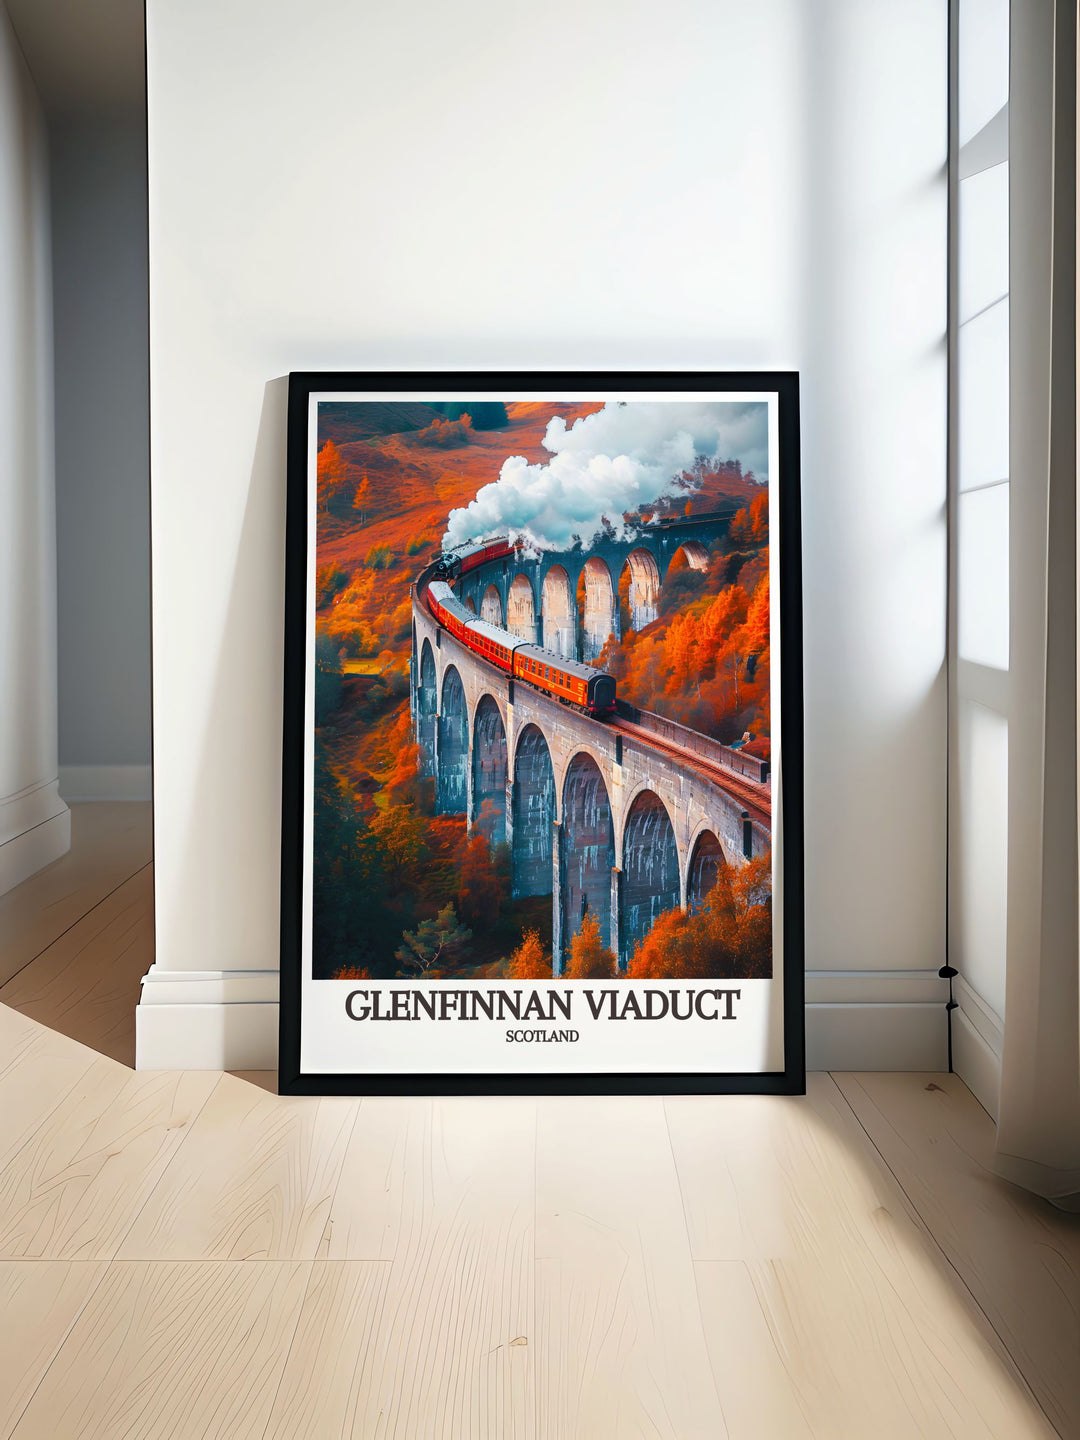 Home decor print featuring the Glenfinnan Viaduct, highlighting the scenic views and historical charm of this famous Scottish landmark, a wonderful addition for any room.